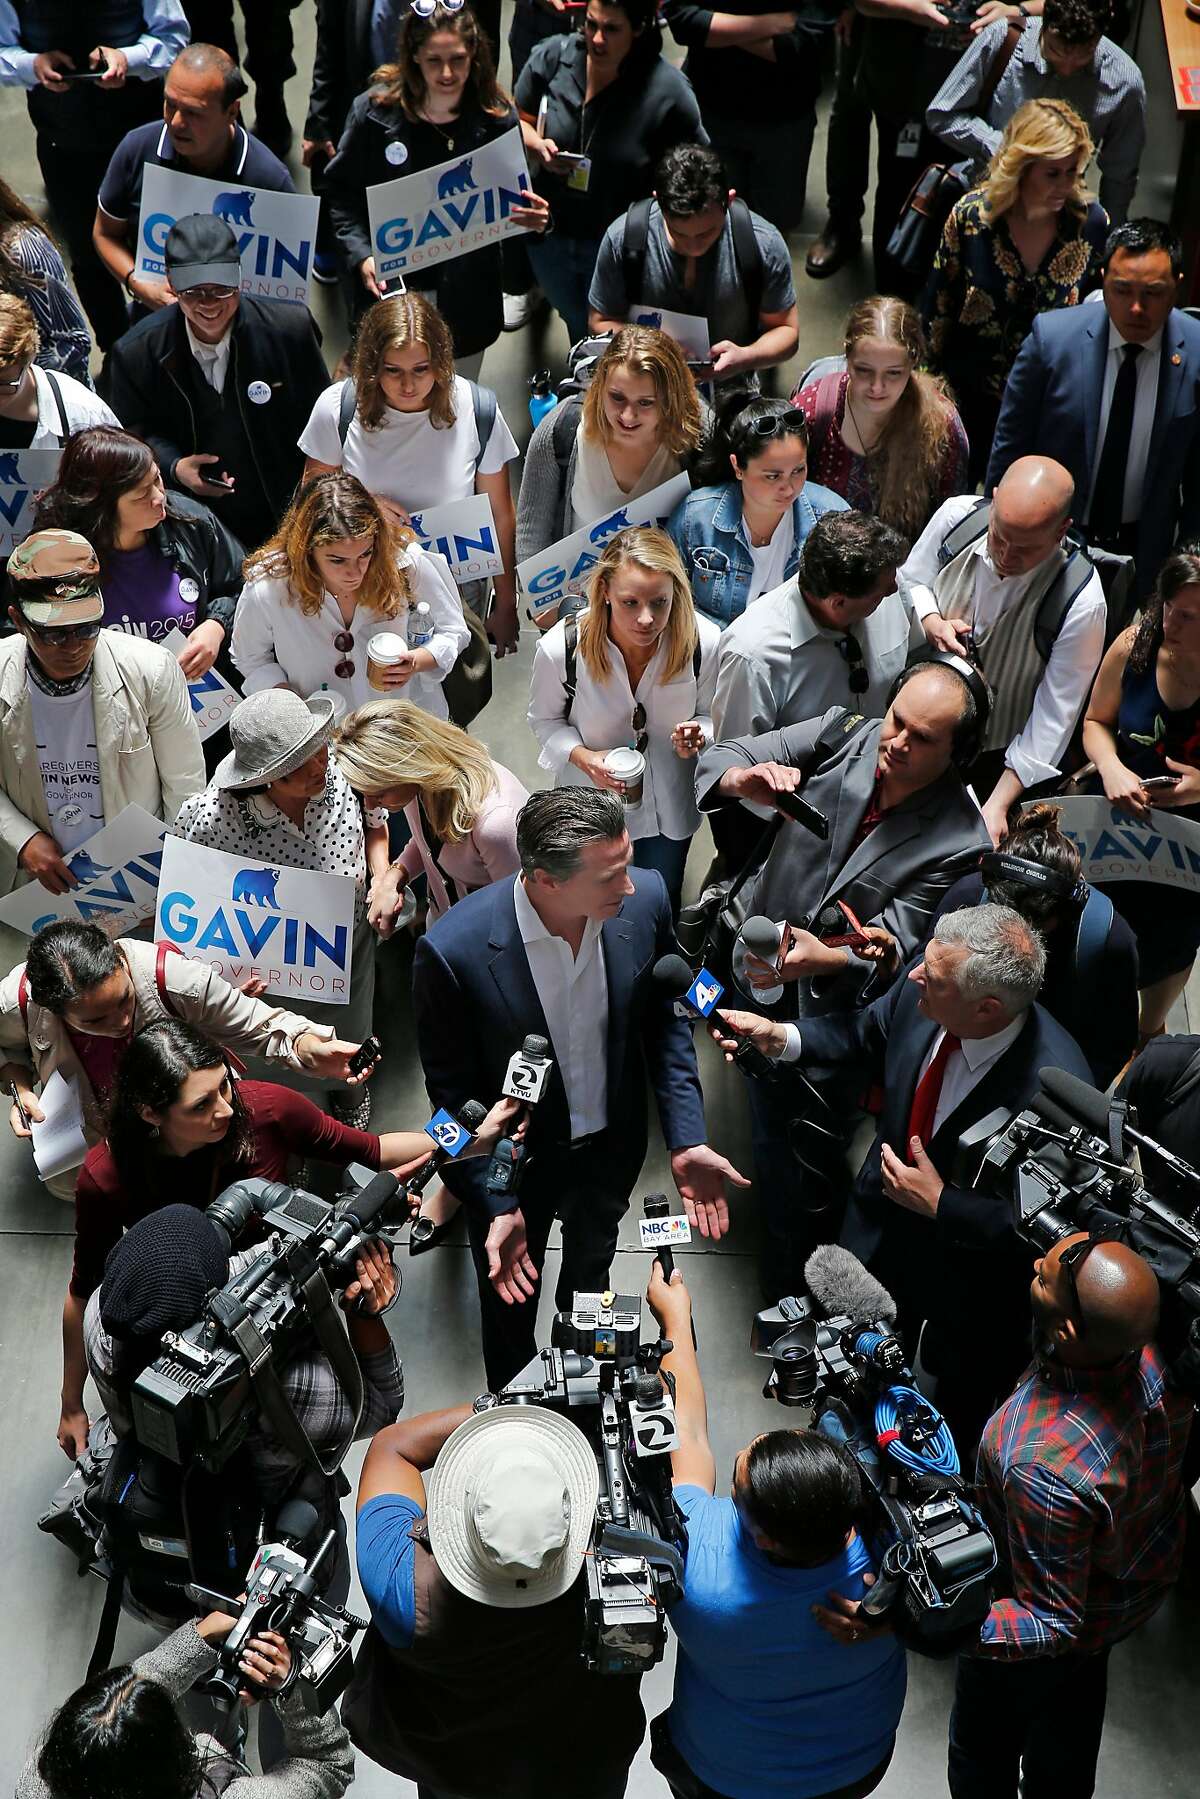 Gavin Newsom greets supporters and talks to members of the news media inside the Ferry Building, Wednesday, June 6, 2018, in San Francisco, Calif. Lt. Gov. Newsom (D) will face Republican businessman John Cox in the race to be the next Governor of California.